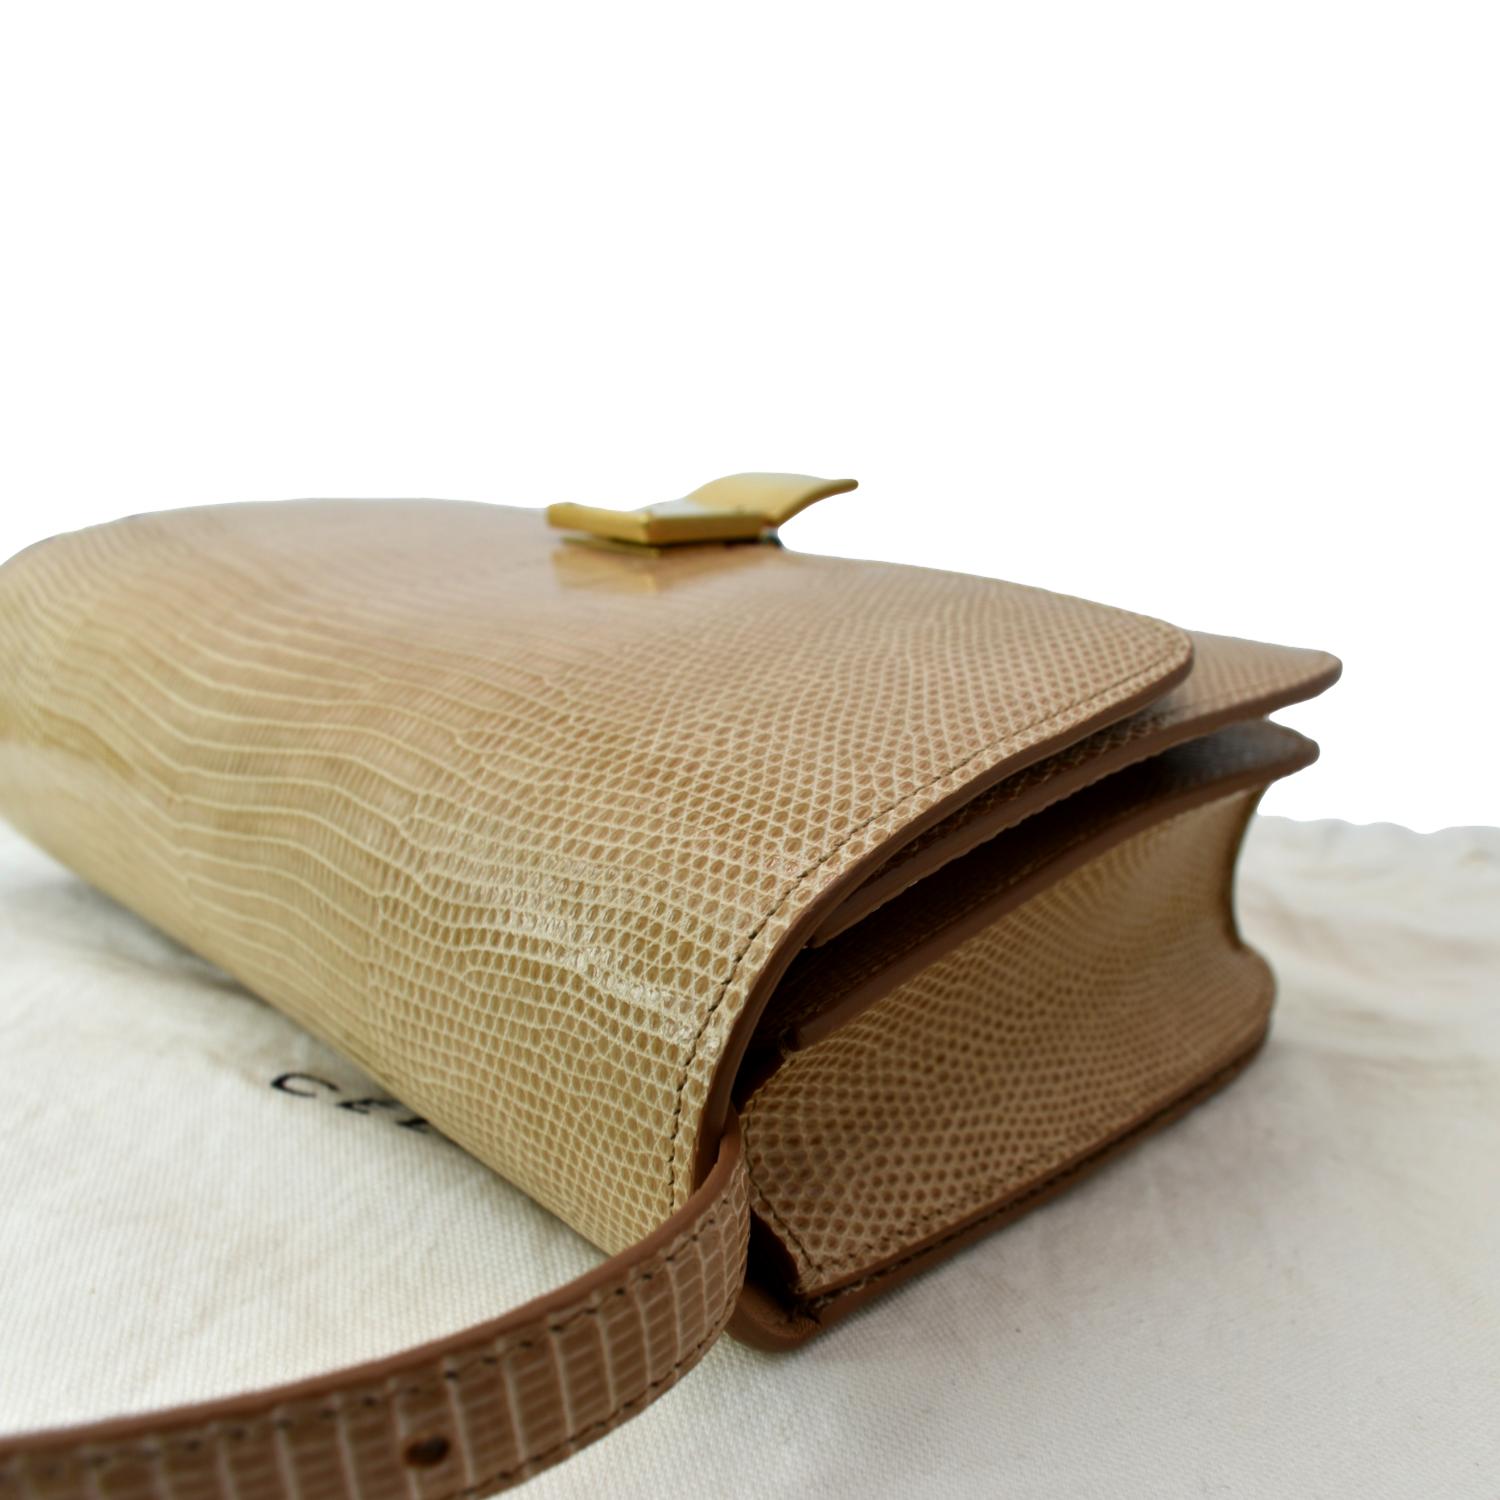 Vintage Celine ivory beige and brown lizard embossed leather combo sho –  eNdApPi ***where you can find your favorite designer  vintages..authentic, affordable, and lovable.